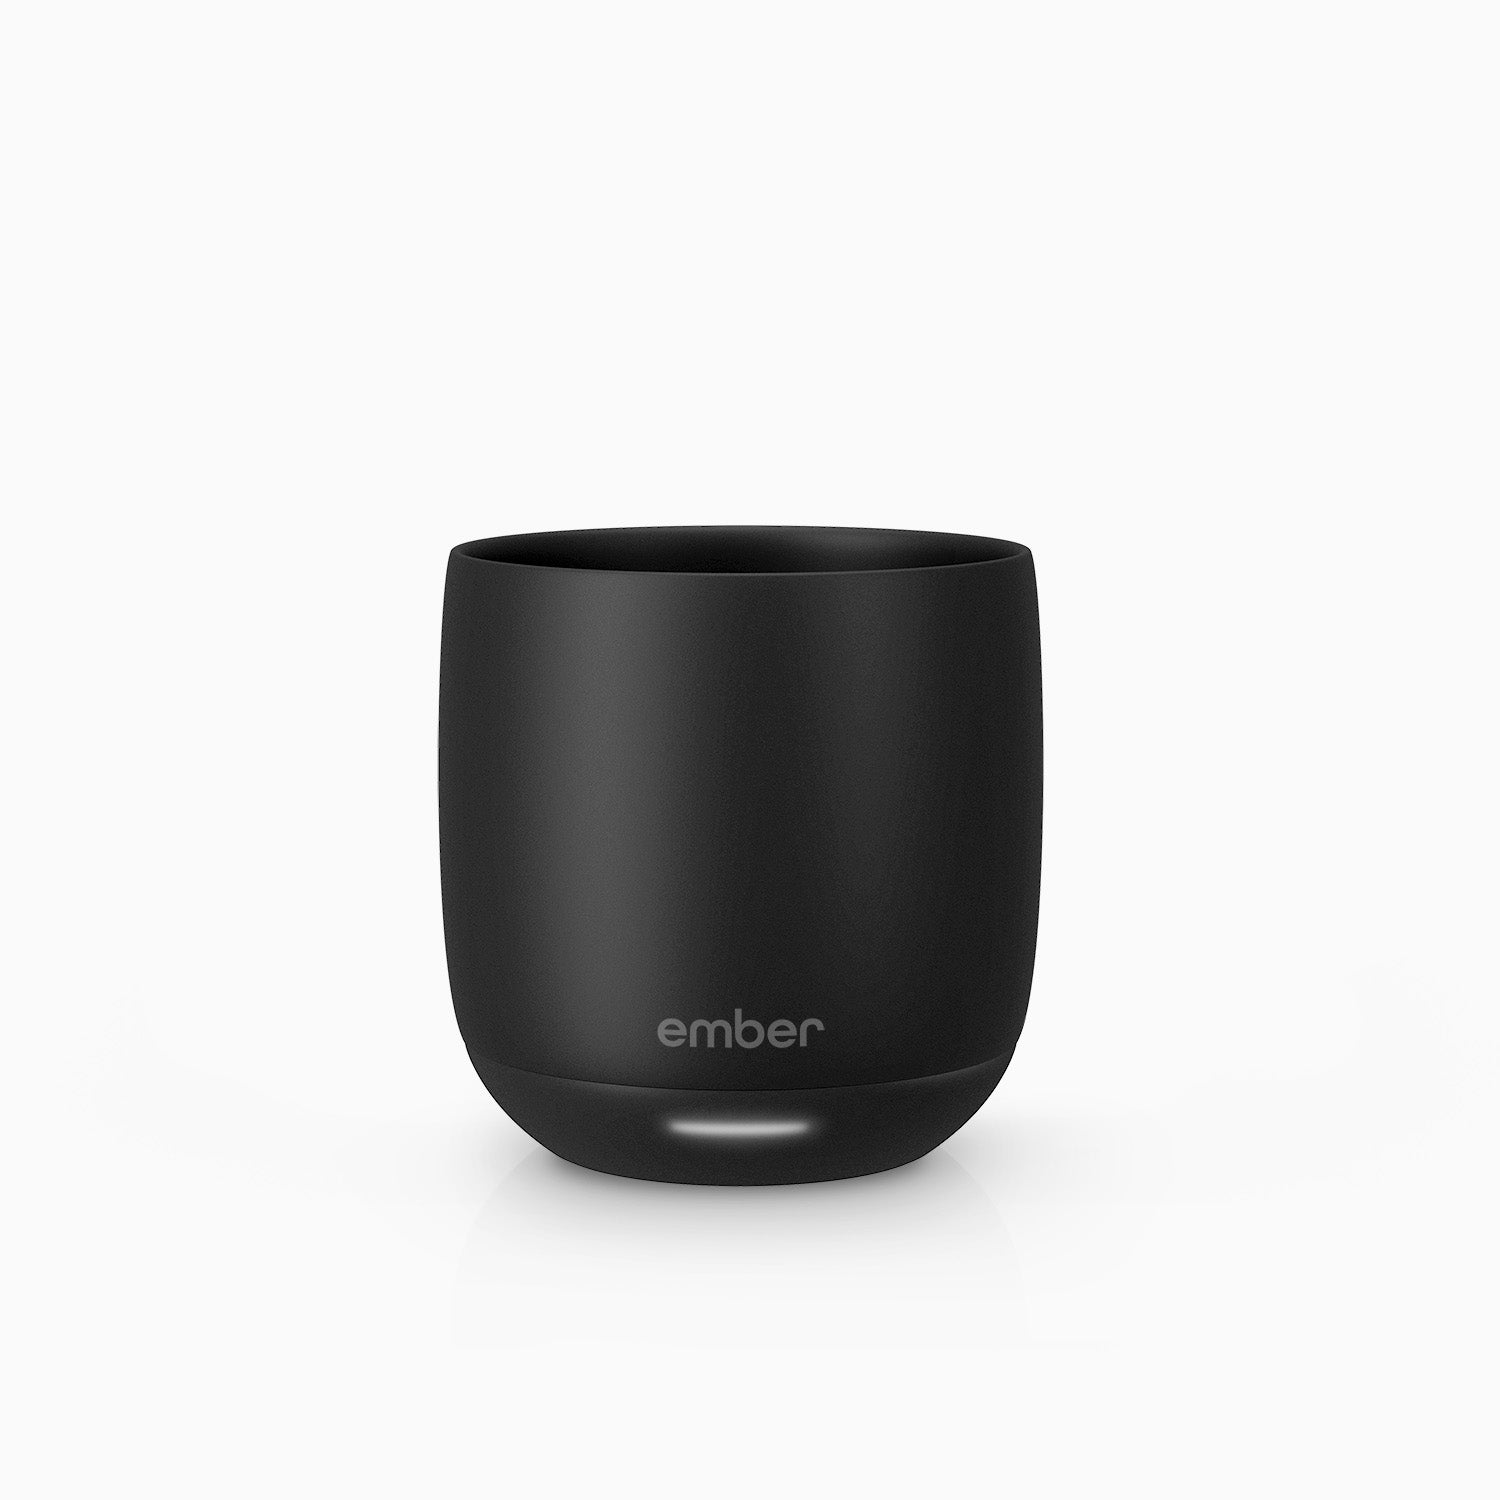 Ember New Temperature Control Smart Mug 2, 296 ml, Copper, 90 Min. Battery  Life - App Controlled Heated Coffee Mug - New & Improved Design